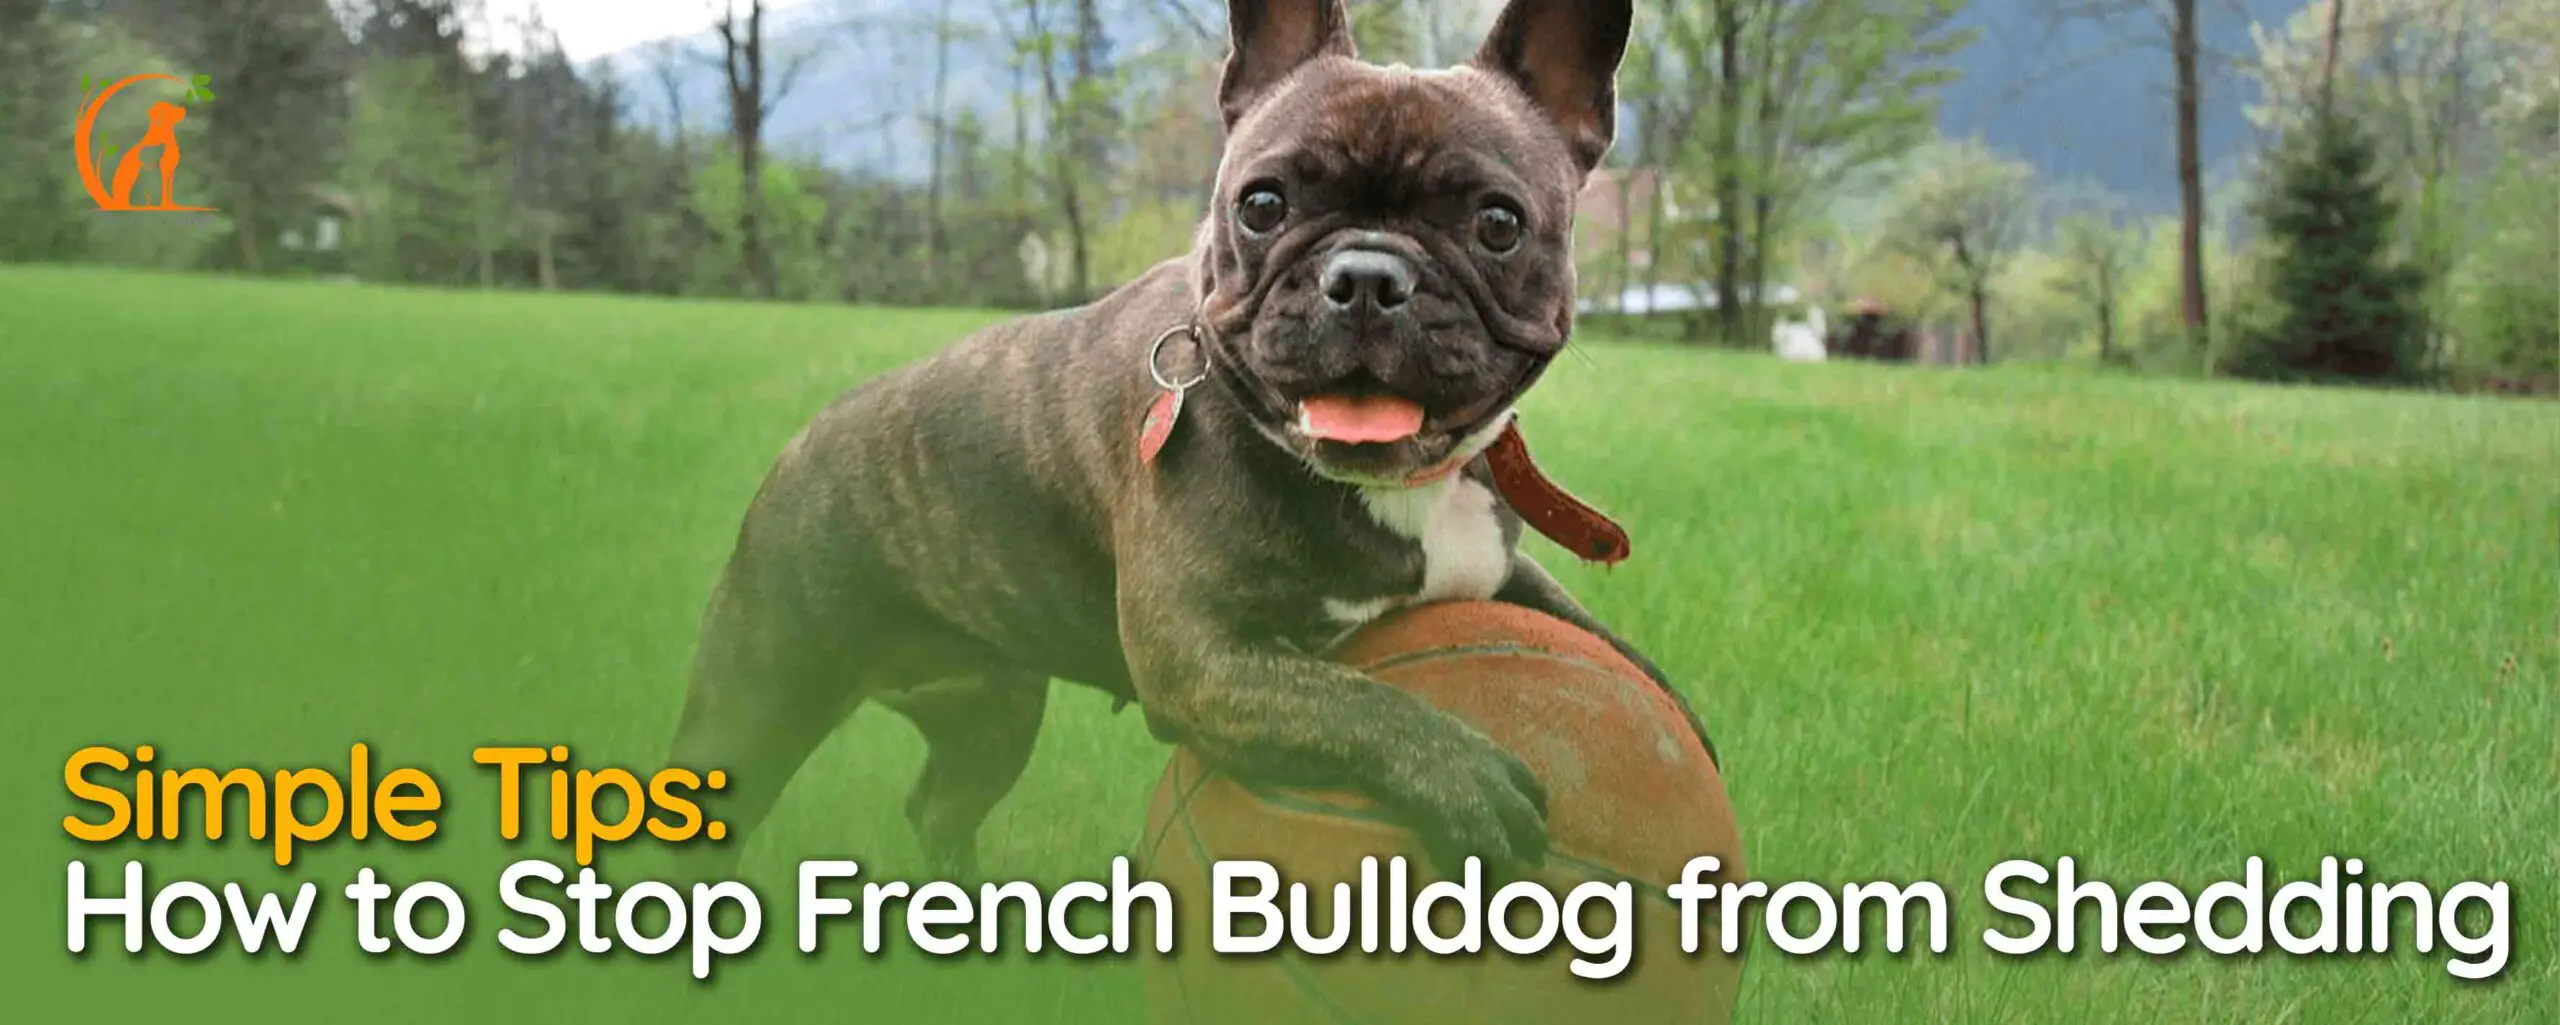 How to Stop French Bulldog from Shedding